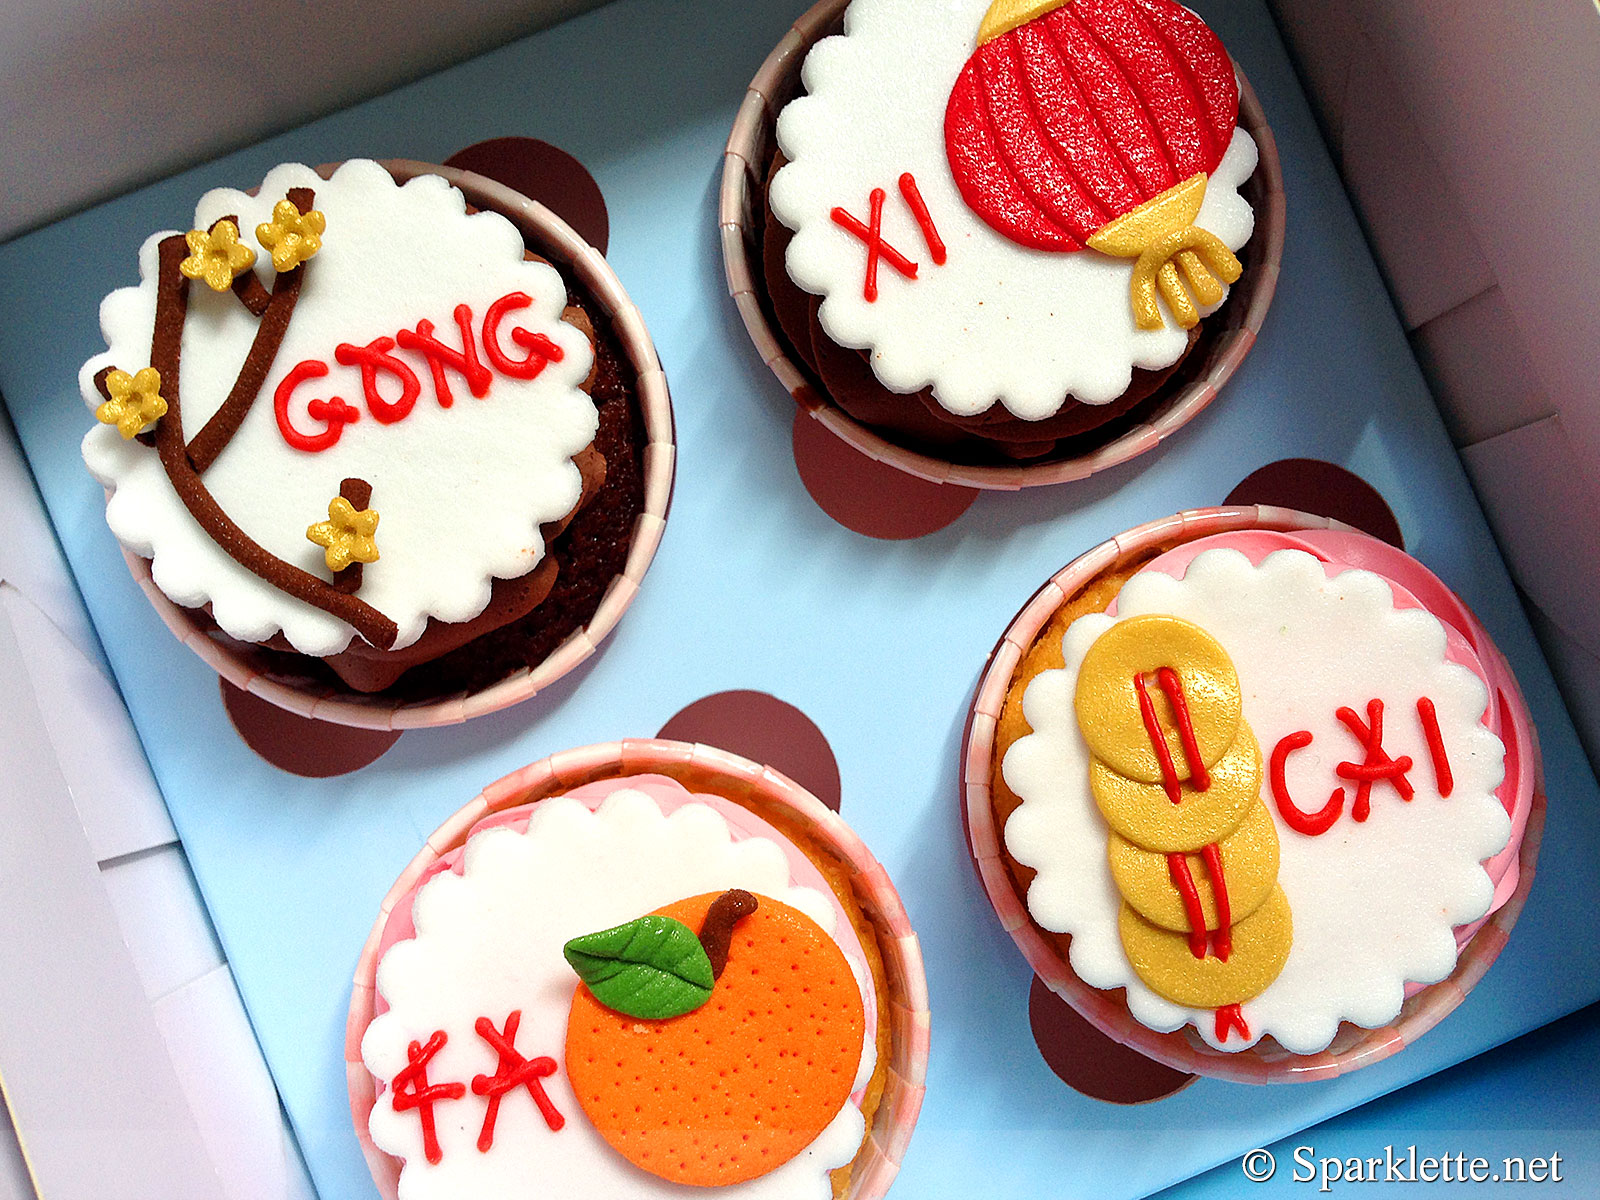 Chinese New Year cupcakes from Emicakes